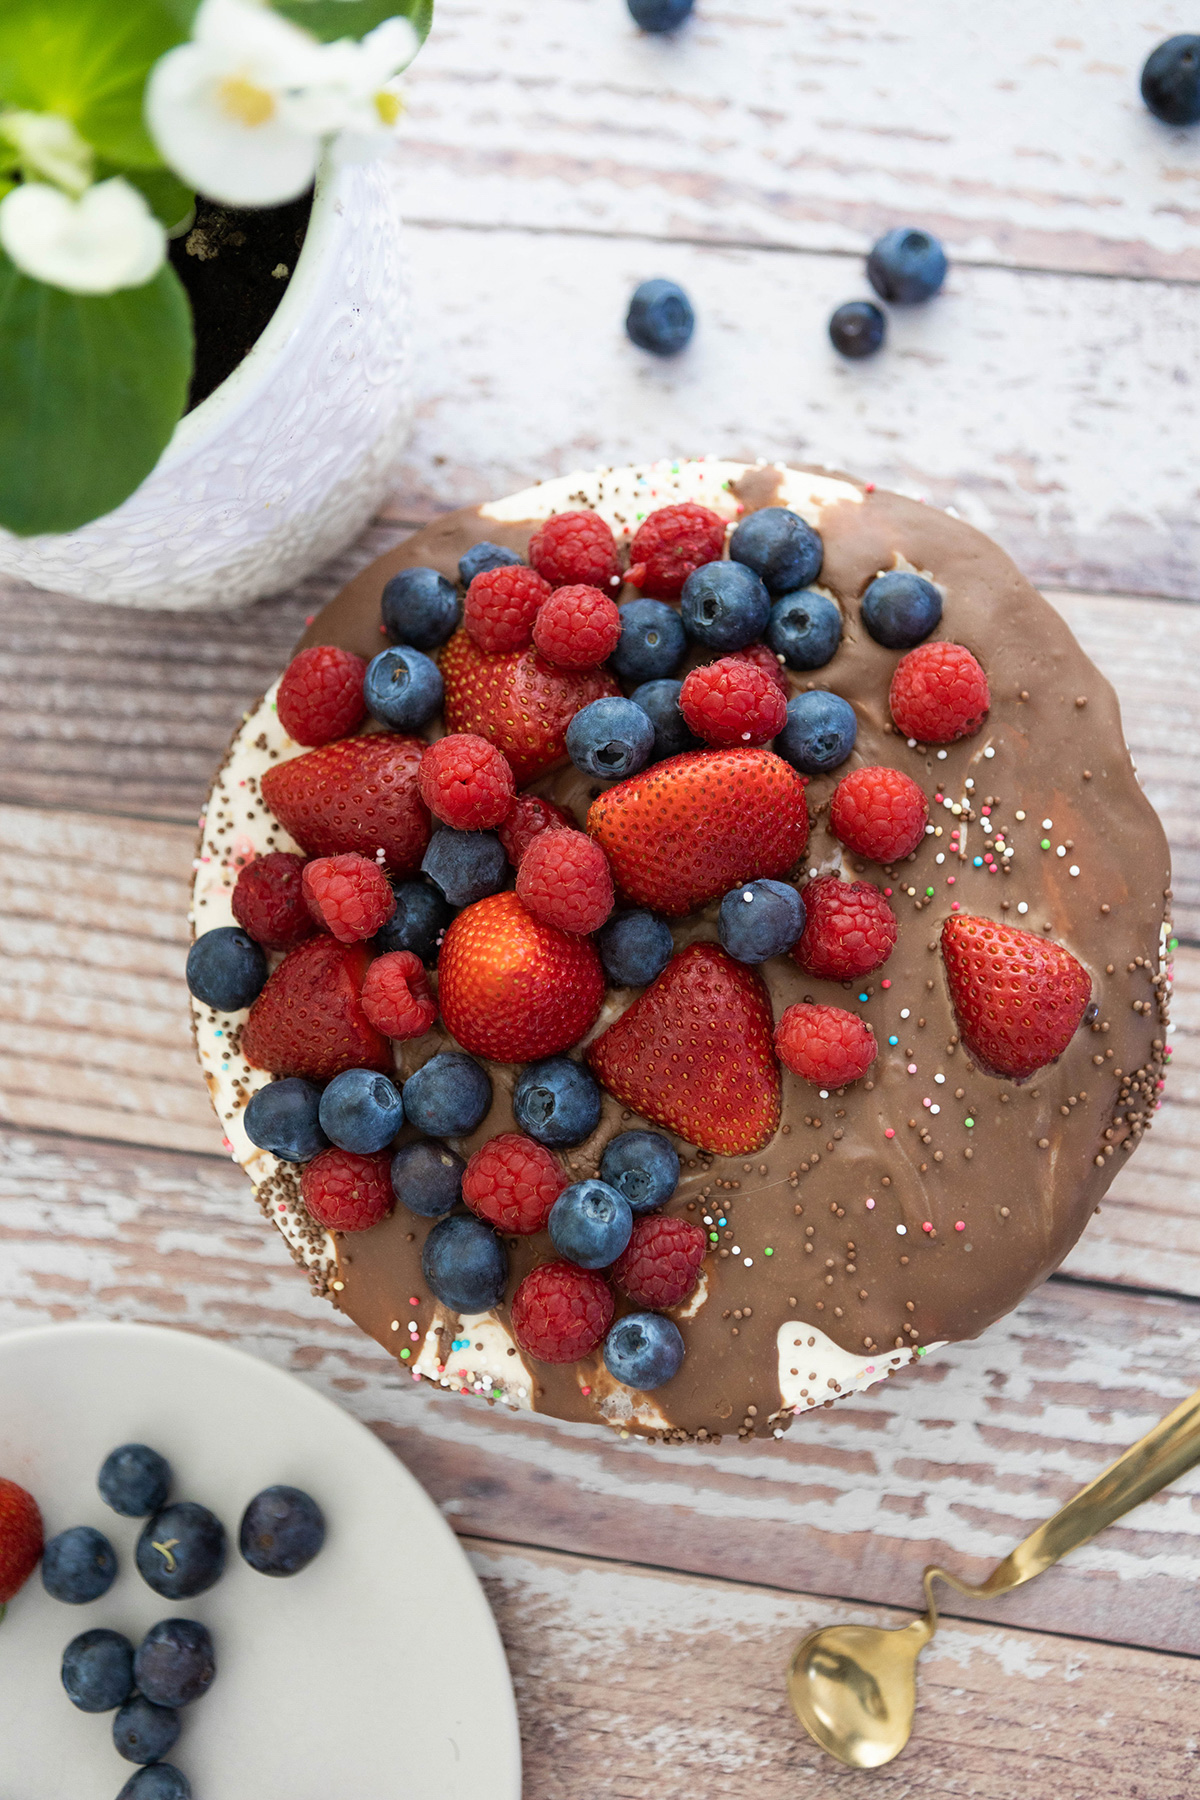 Layered cake with chocolate and berries on top and scattered around.